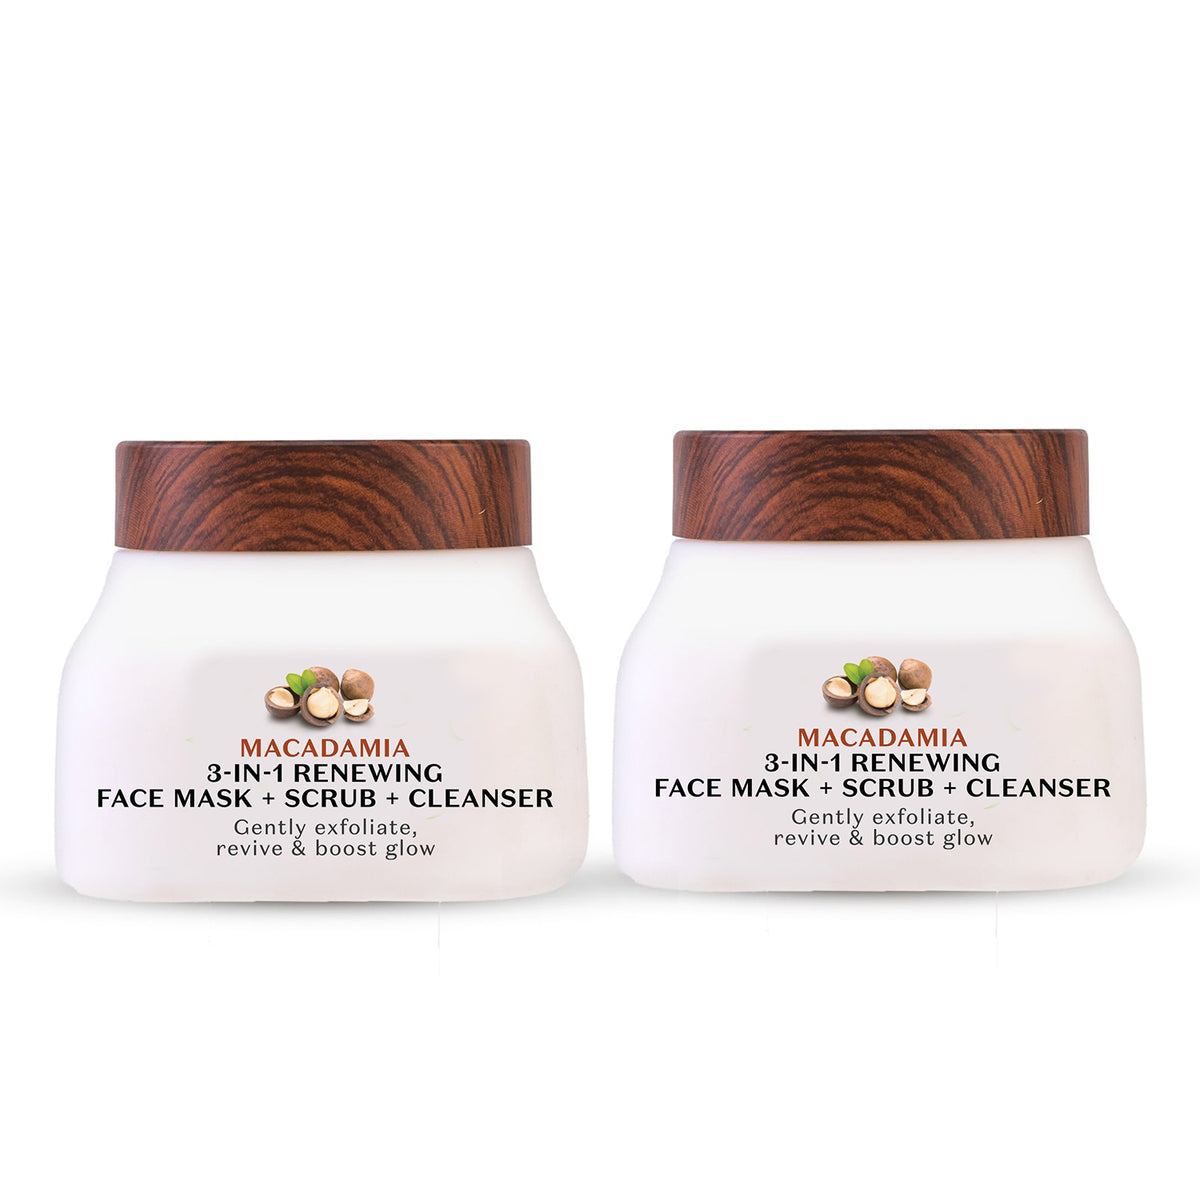 [CRED] Macadamia 3 in 1 Renewing Face Mask, Scrub & Cleanser Combo | Pack of 2 | From the makers of Parachute Advansed | 280ml - PureSense